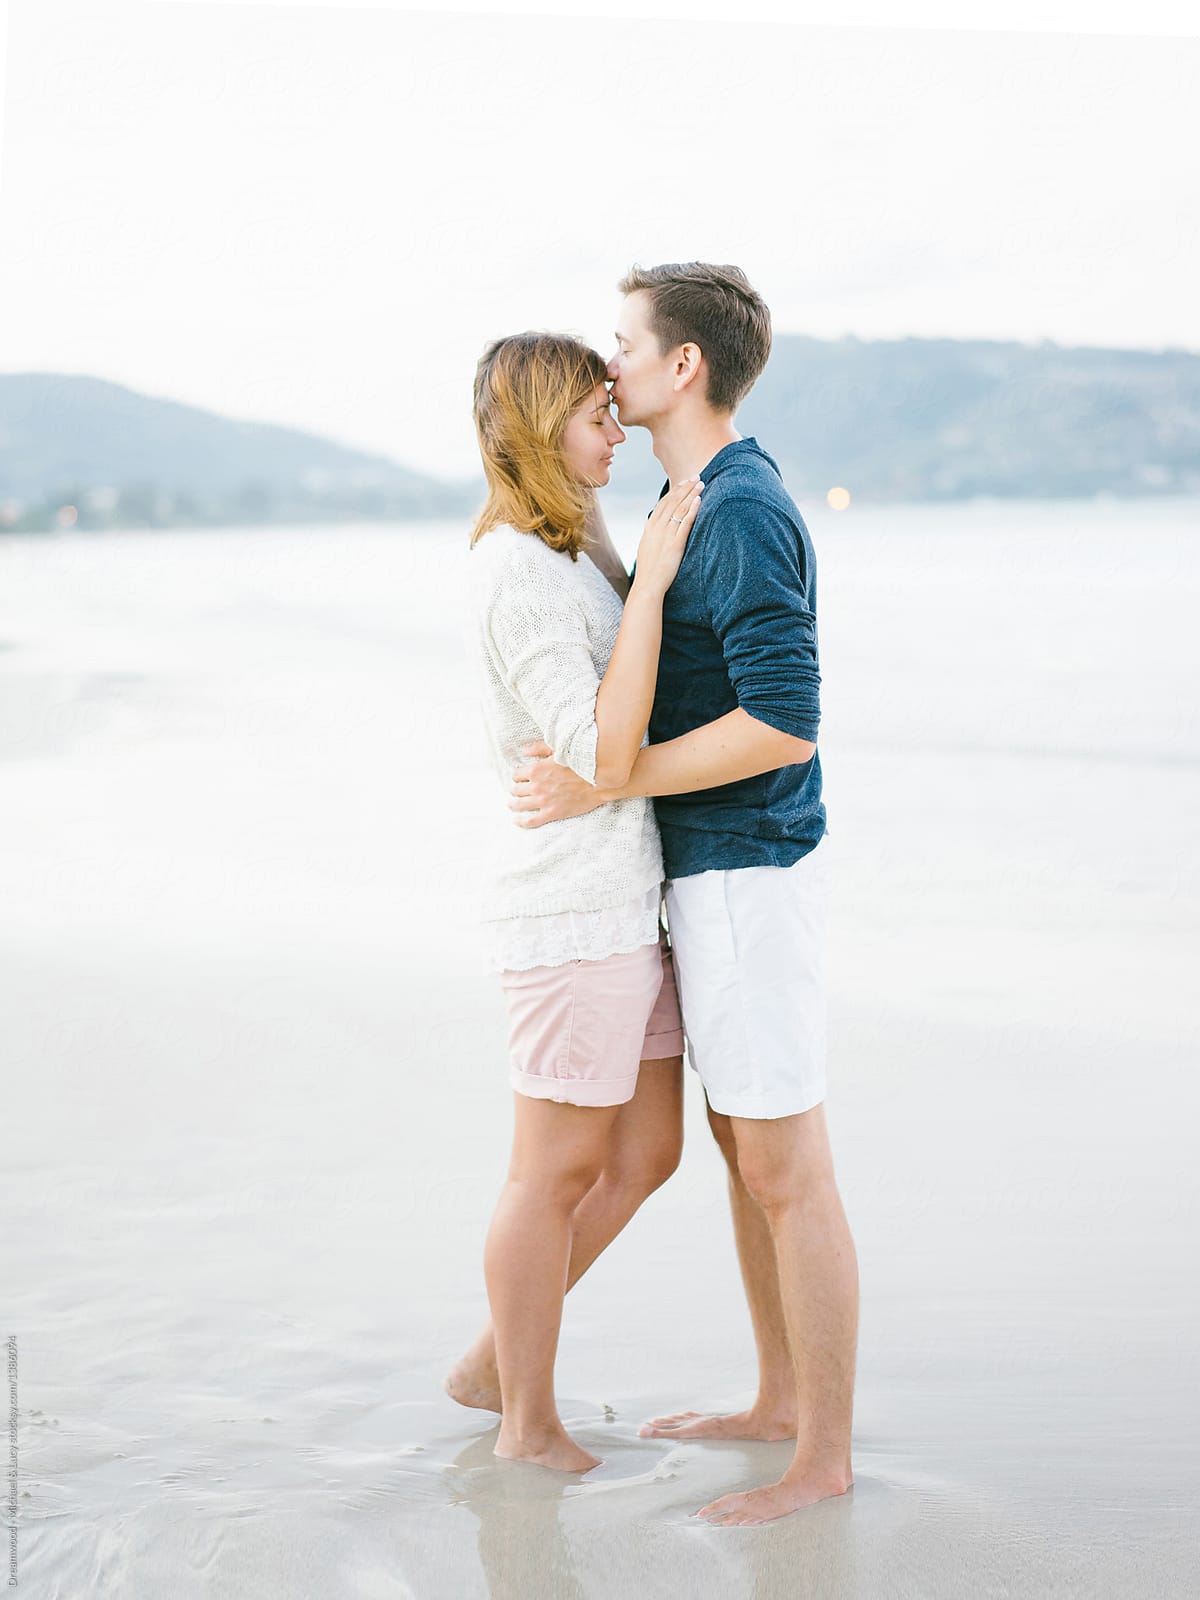 A Couple's Honeymoon Photoshoot in Florence - Local Lens